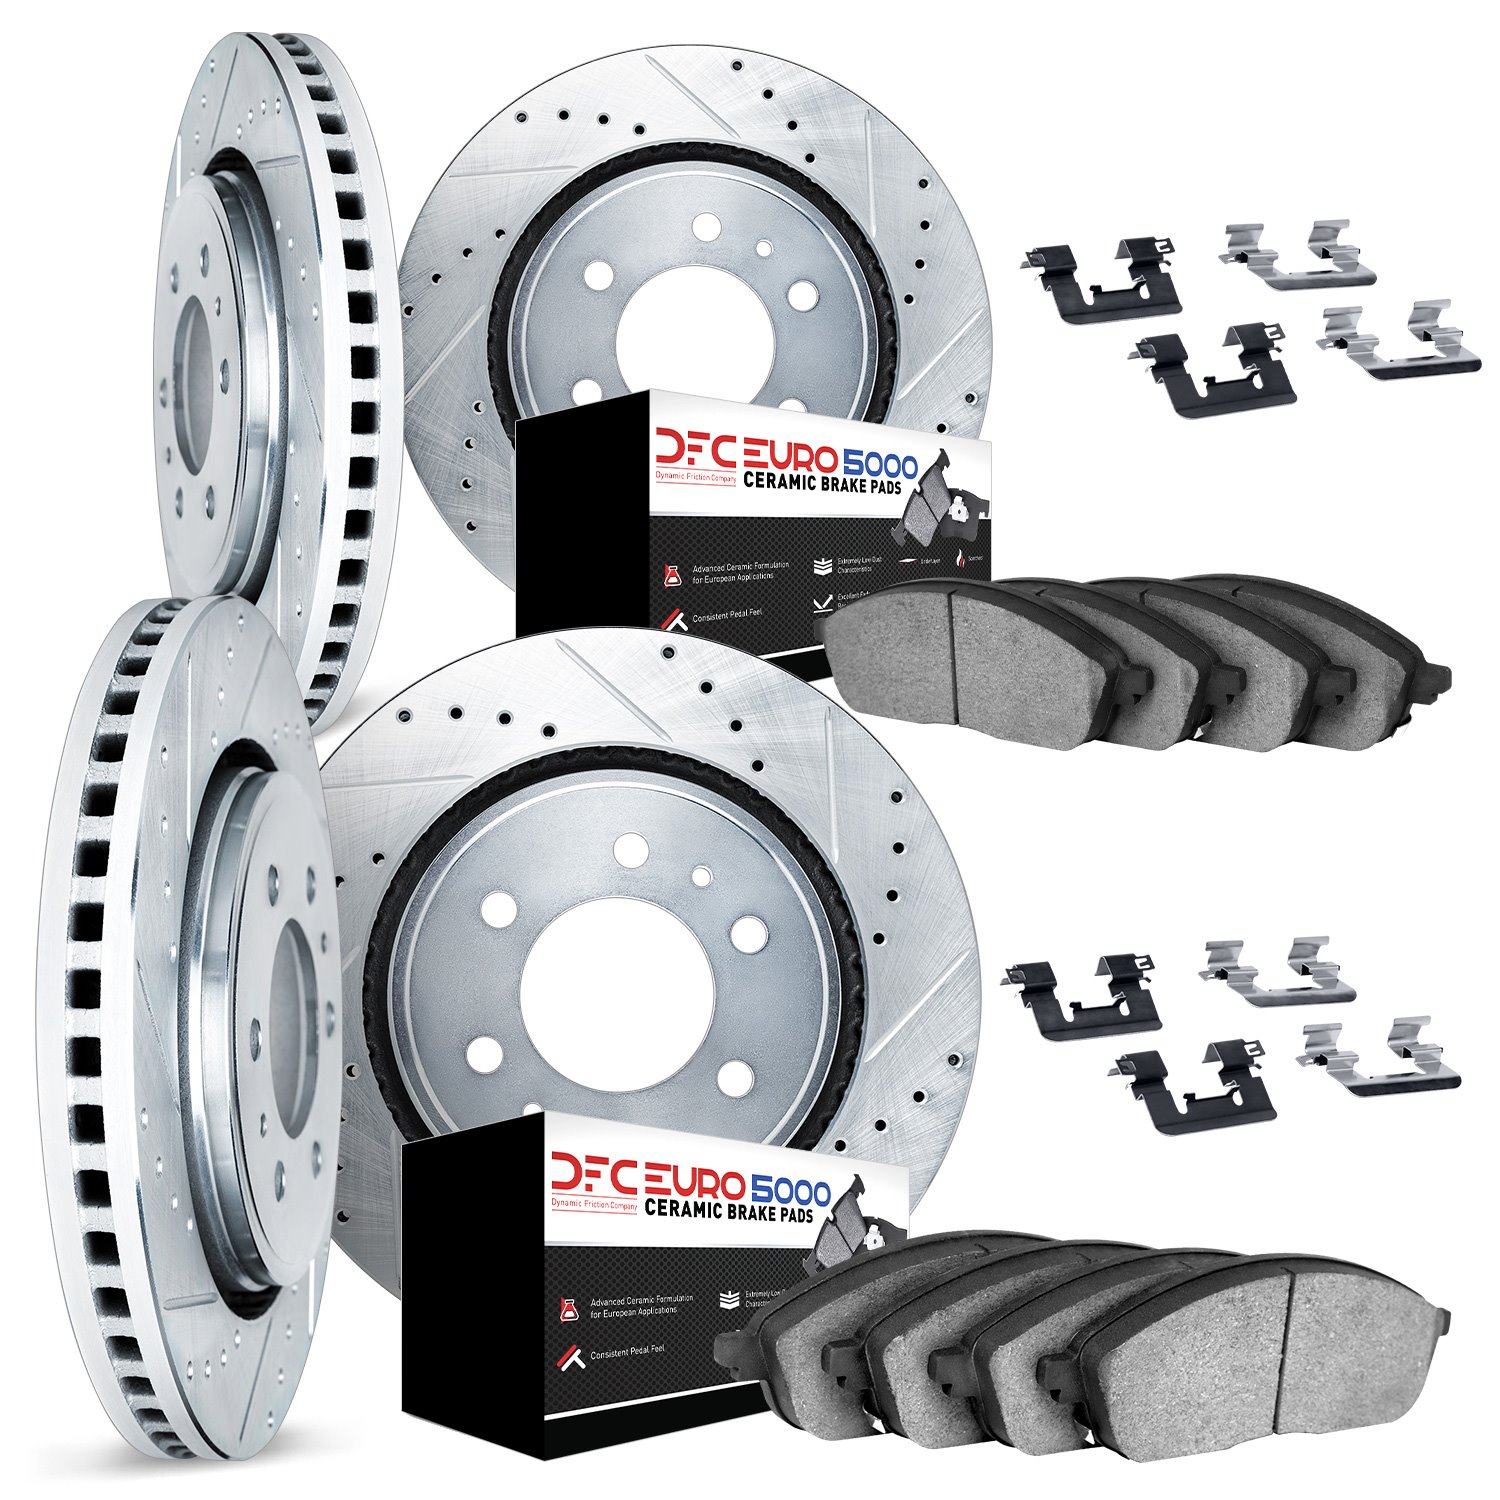 7614-48002 Drilled/Slotted Brake Rotors w/5000 Euro Ceramic Brake Pads Kit & Hardware [Silver], 2006-2009 GM, Position: Front an